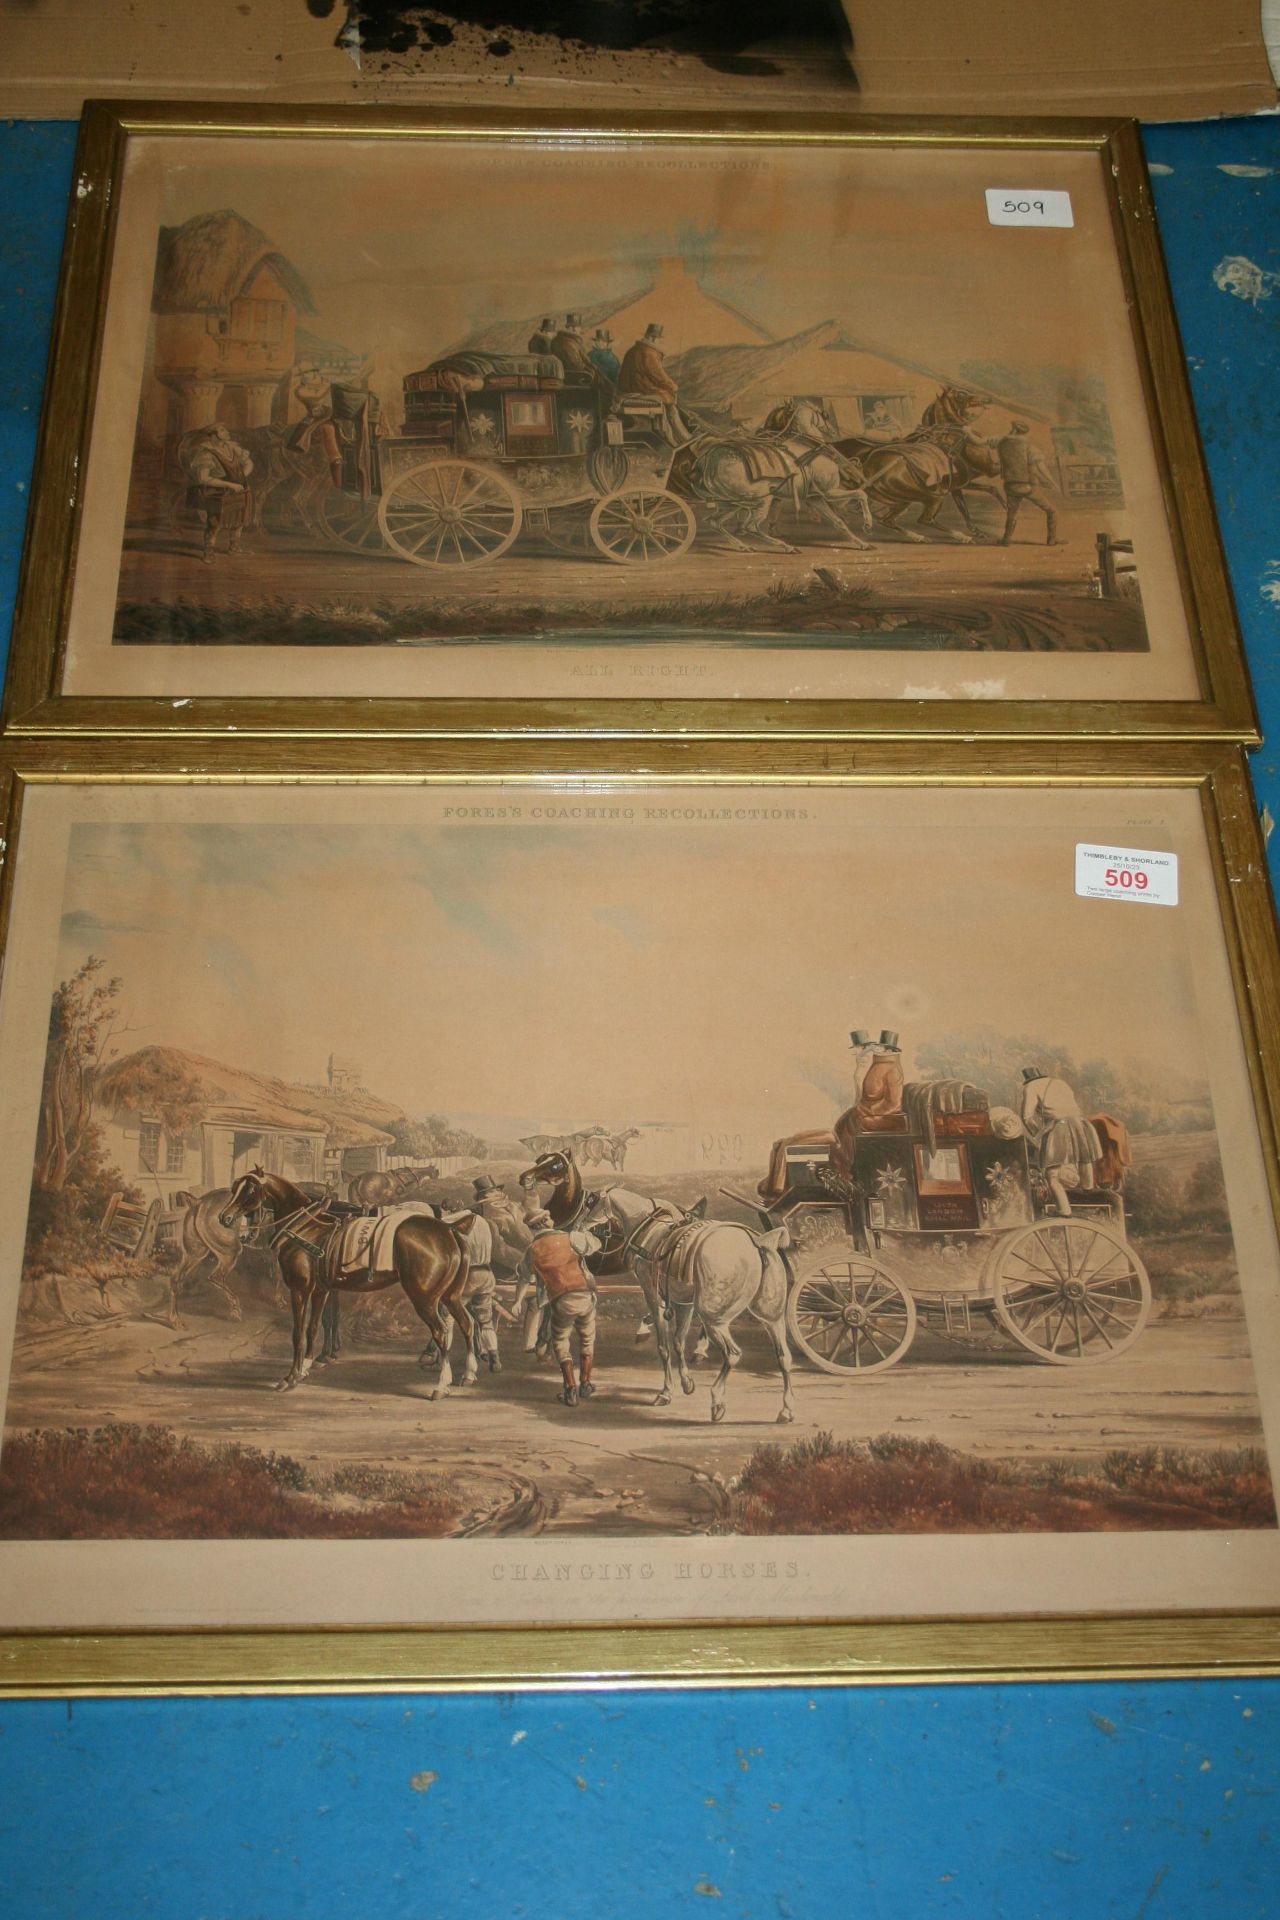 Two large coaching prints by Cooper Henderson: 'Changing Horses' and 'Pulling up to unskid'